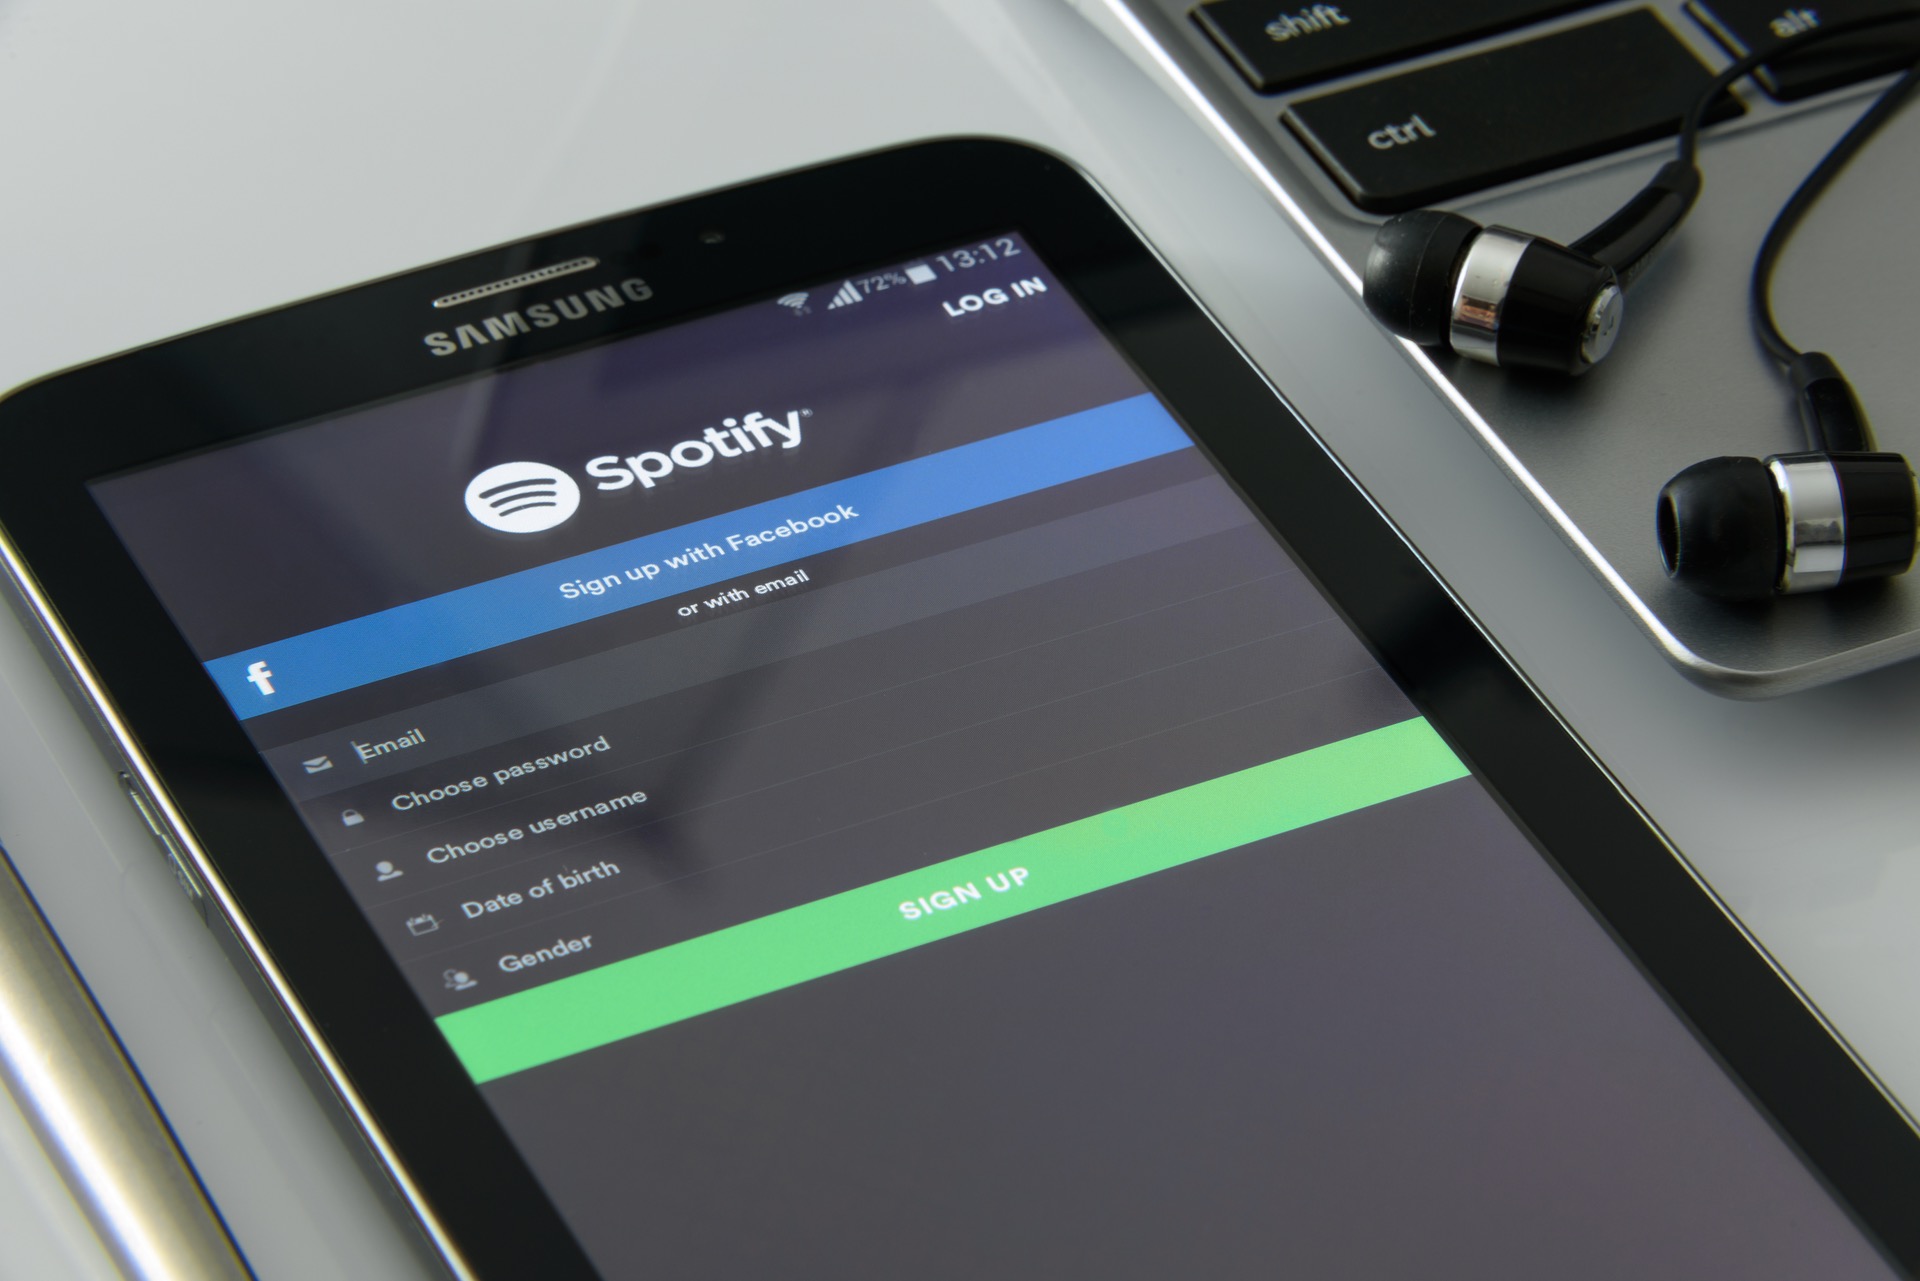 Spotify application on a cellphone